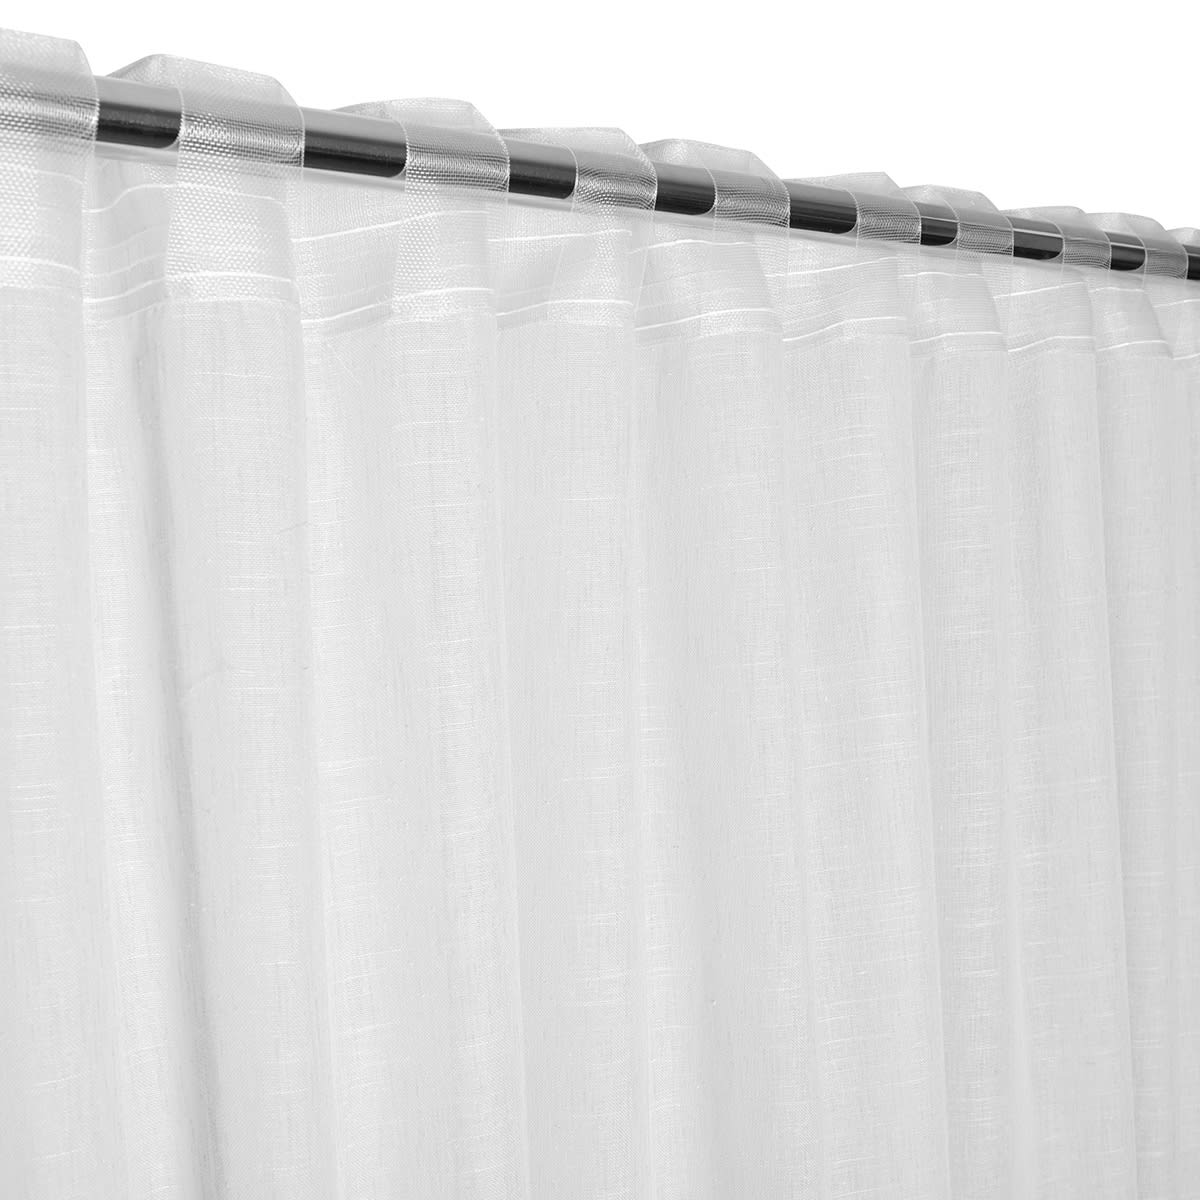 CAMBRIA WHITE FILTER CURTAIN 200X280CM WITH WEBBING AND CONCEALED LOOP - best price from Maltashopper.com BR480011083